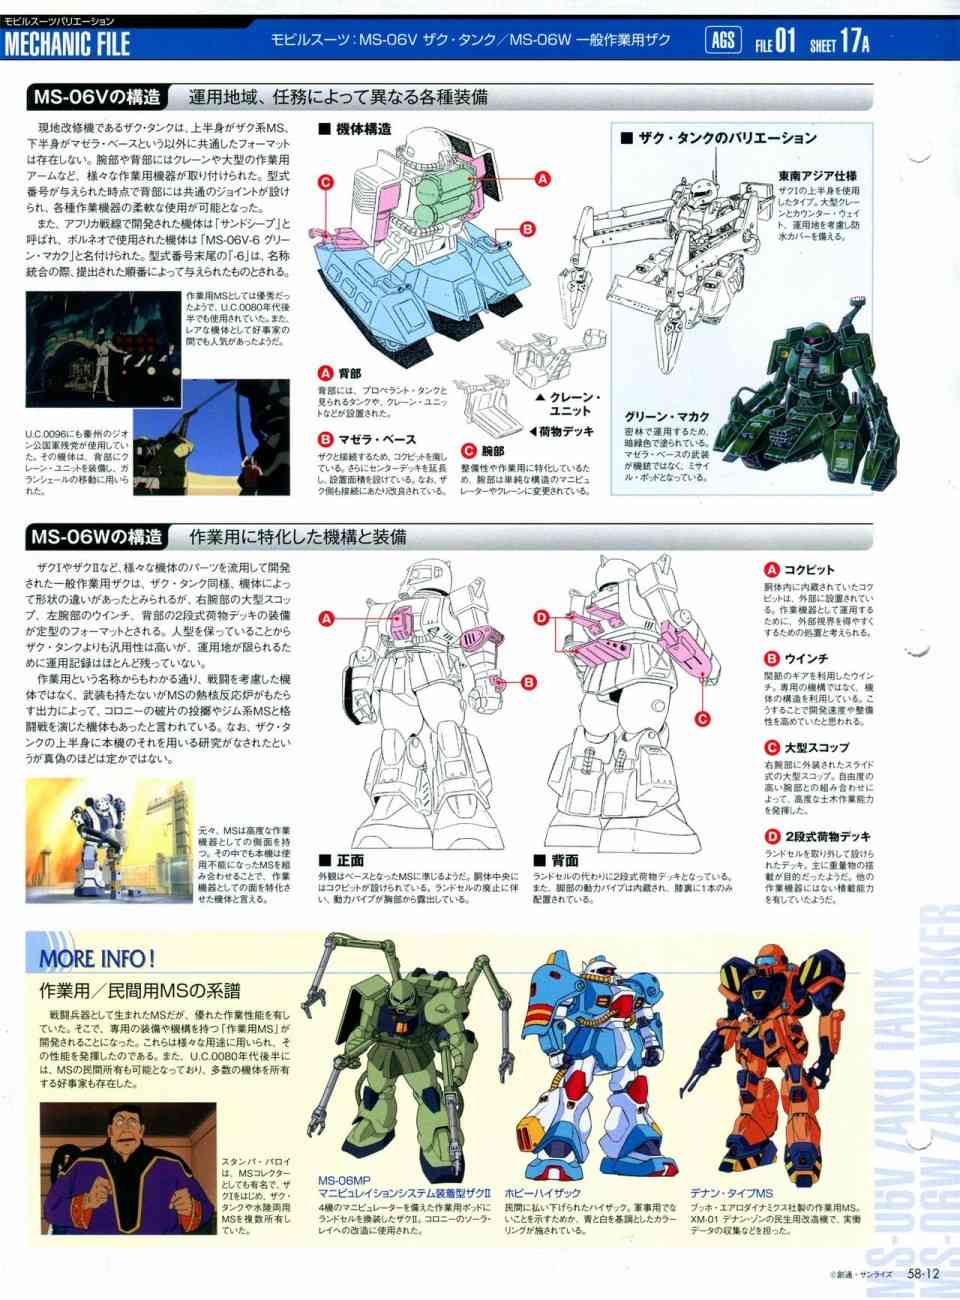 The Official Gundam Perfect File  - 第56-64話(2/7) - 2